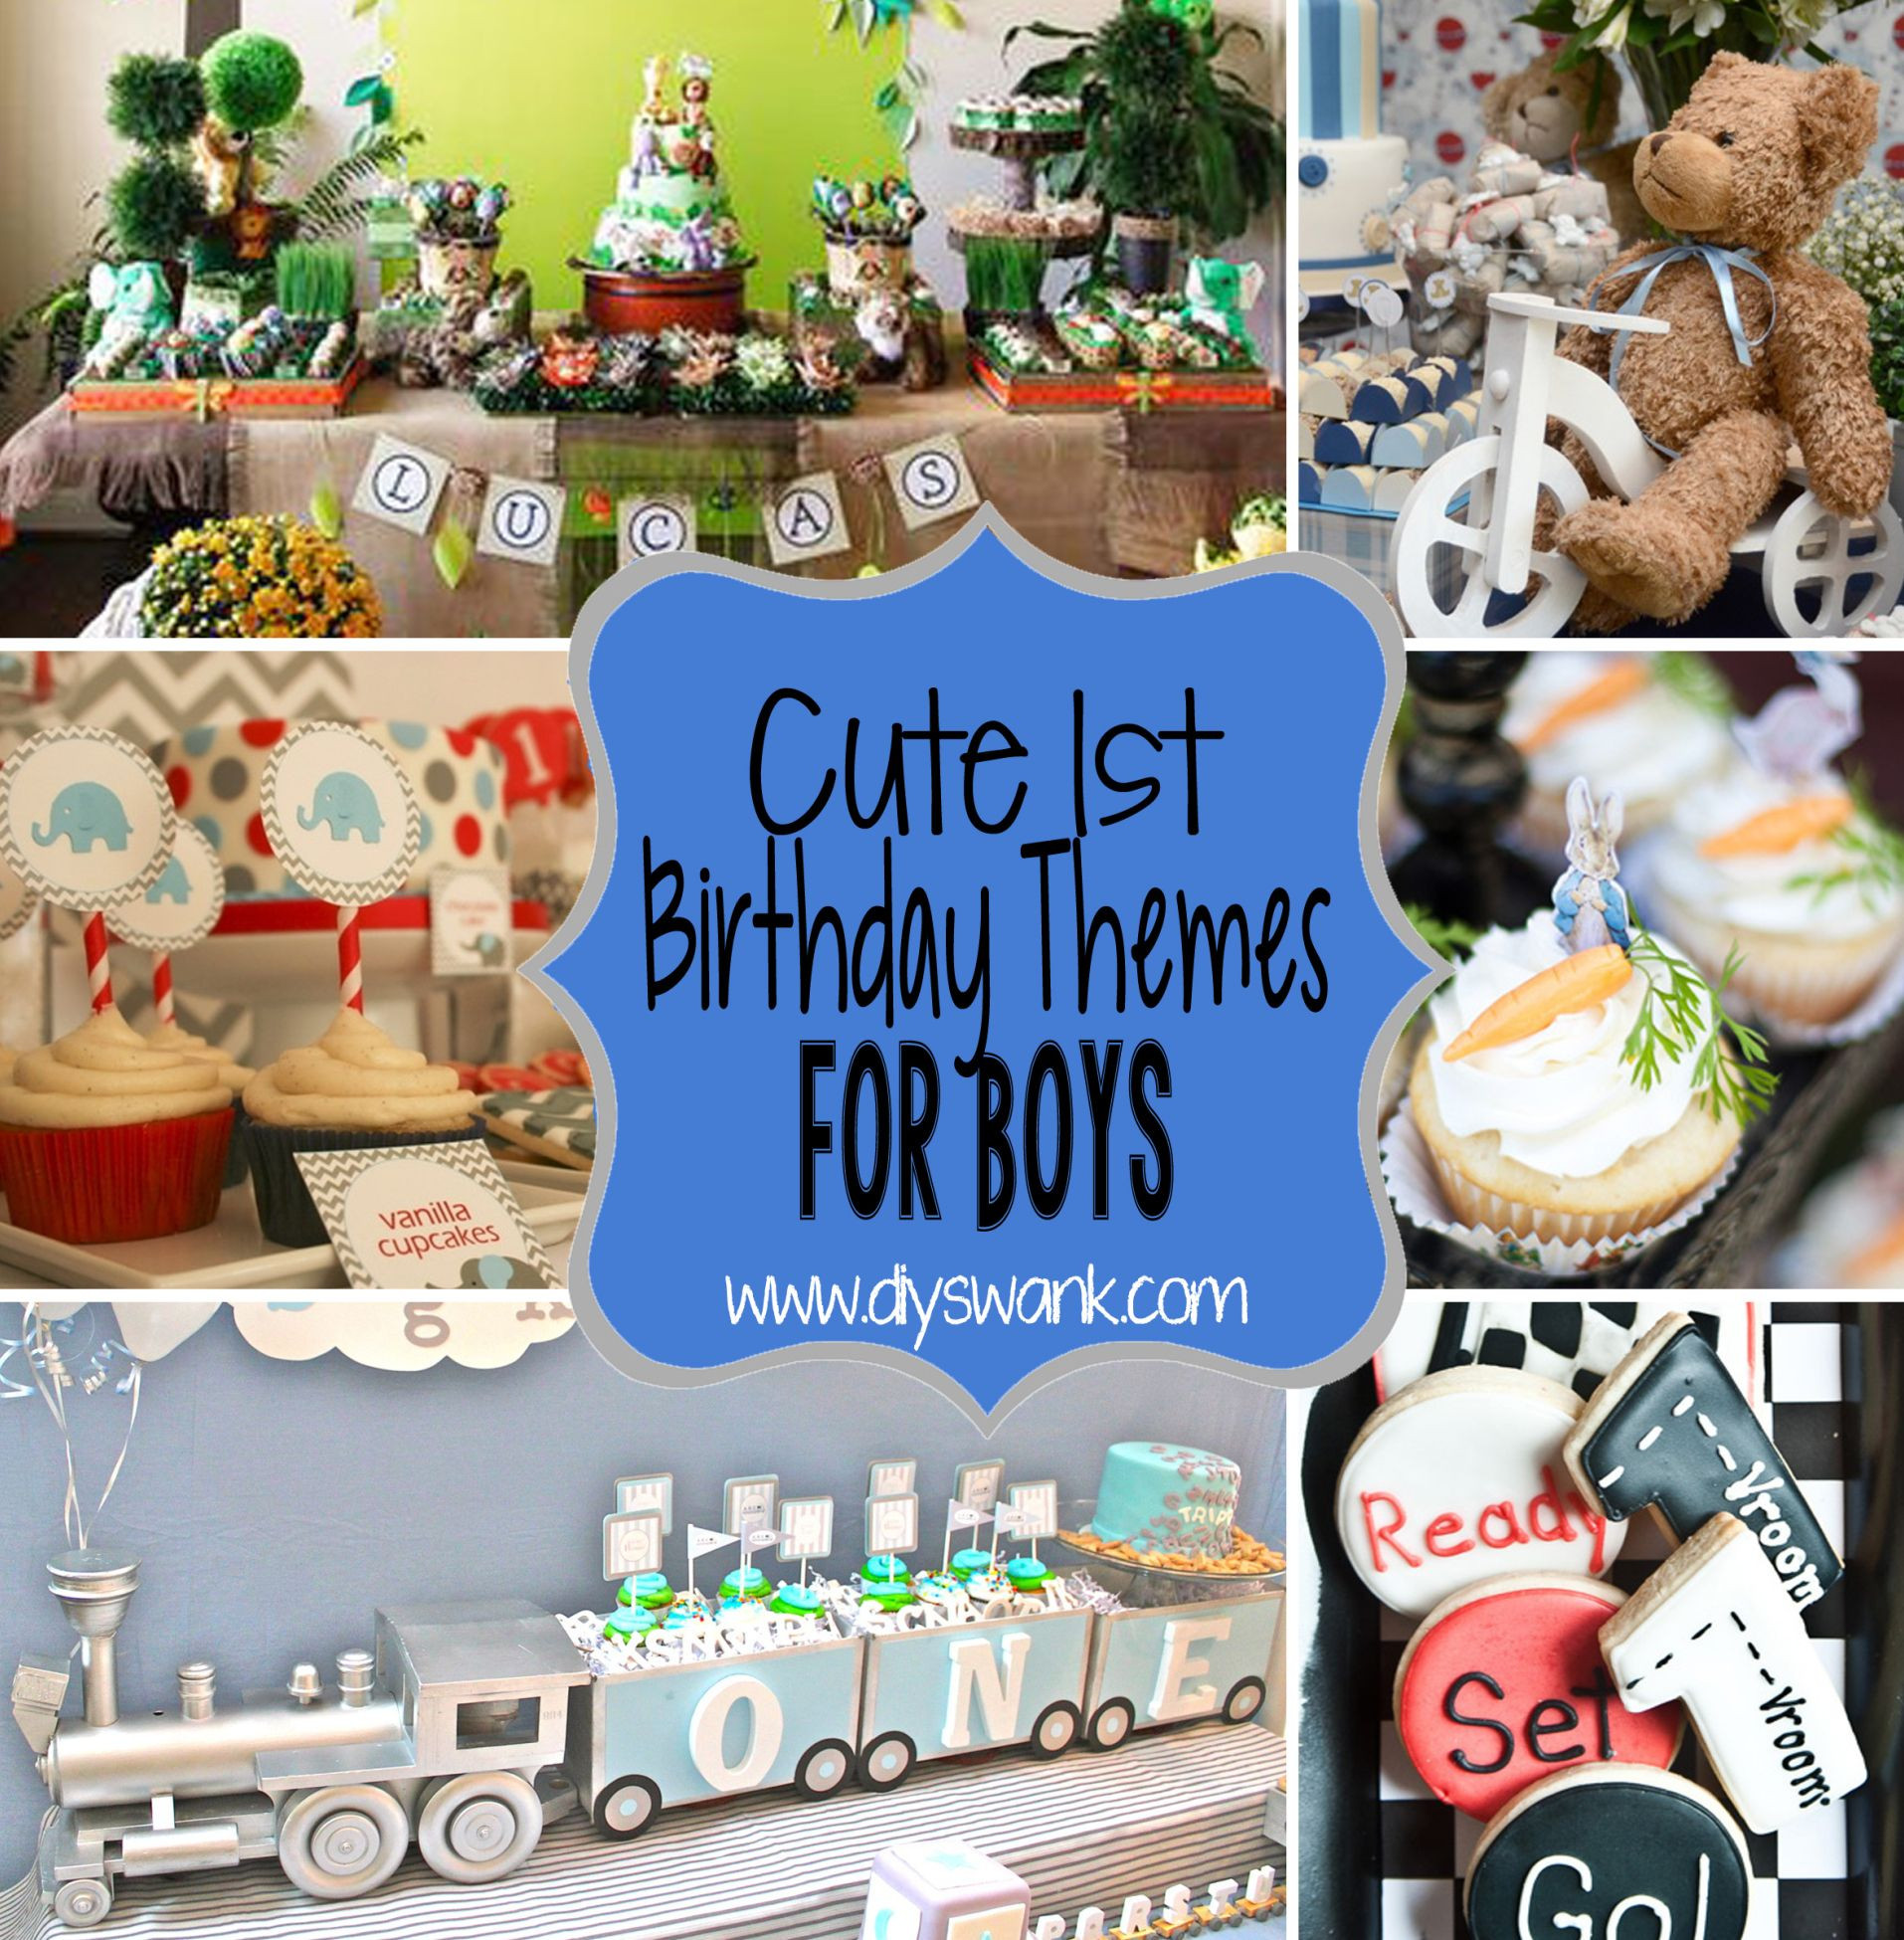 First Birthday Gift Ideas For Boys
 Cute Boy 1st Birthday Party Themes With images